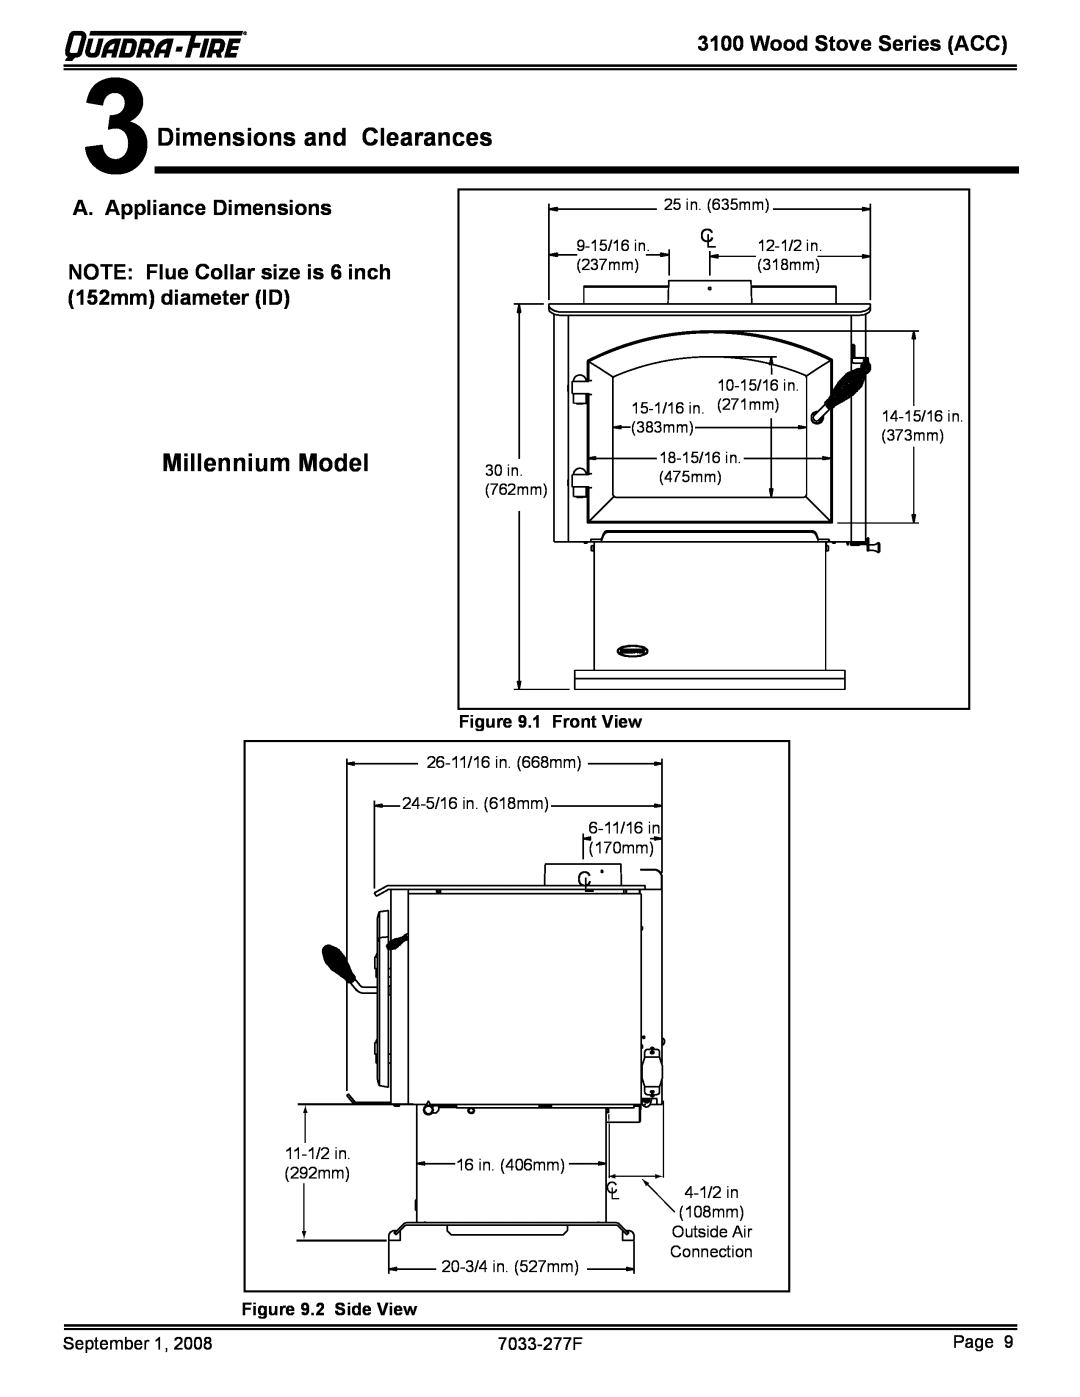 Hearth and Home Technologies 31M-ACC-MBK Dimensions and Clearances, Millennium Model, A. Appliance Dimensions, 2 Side View 